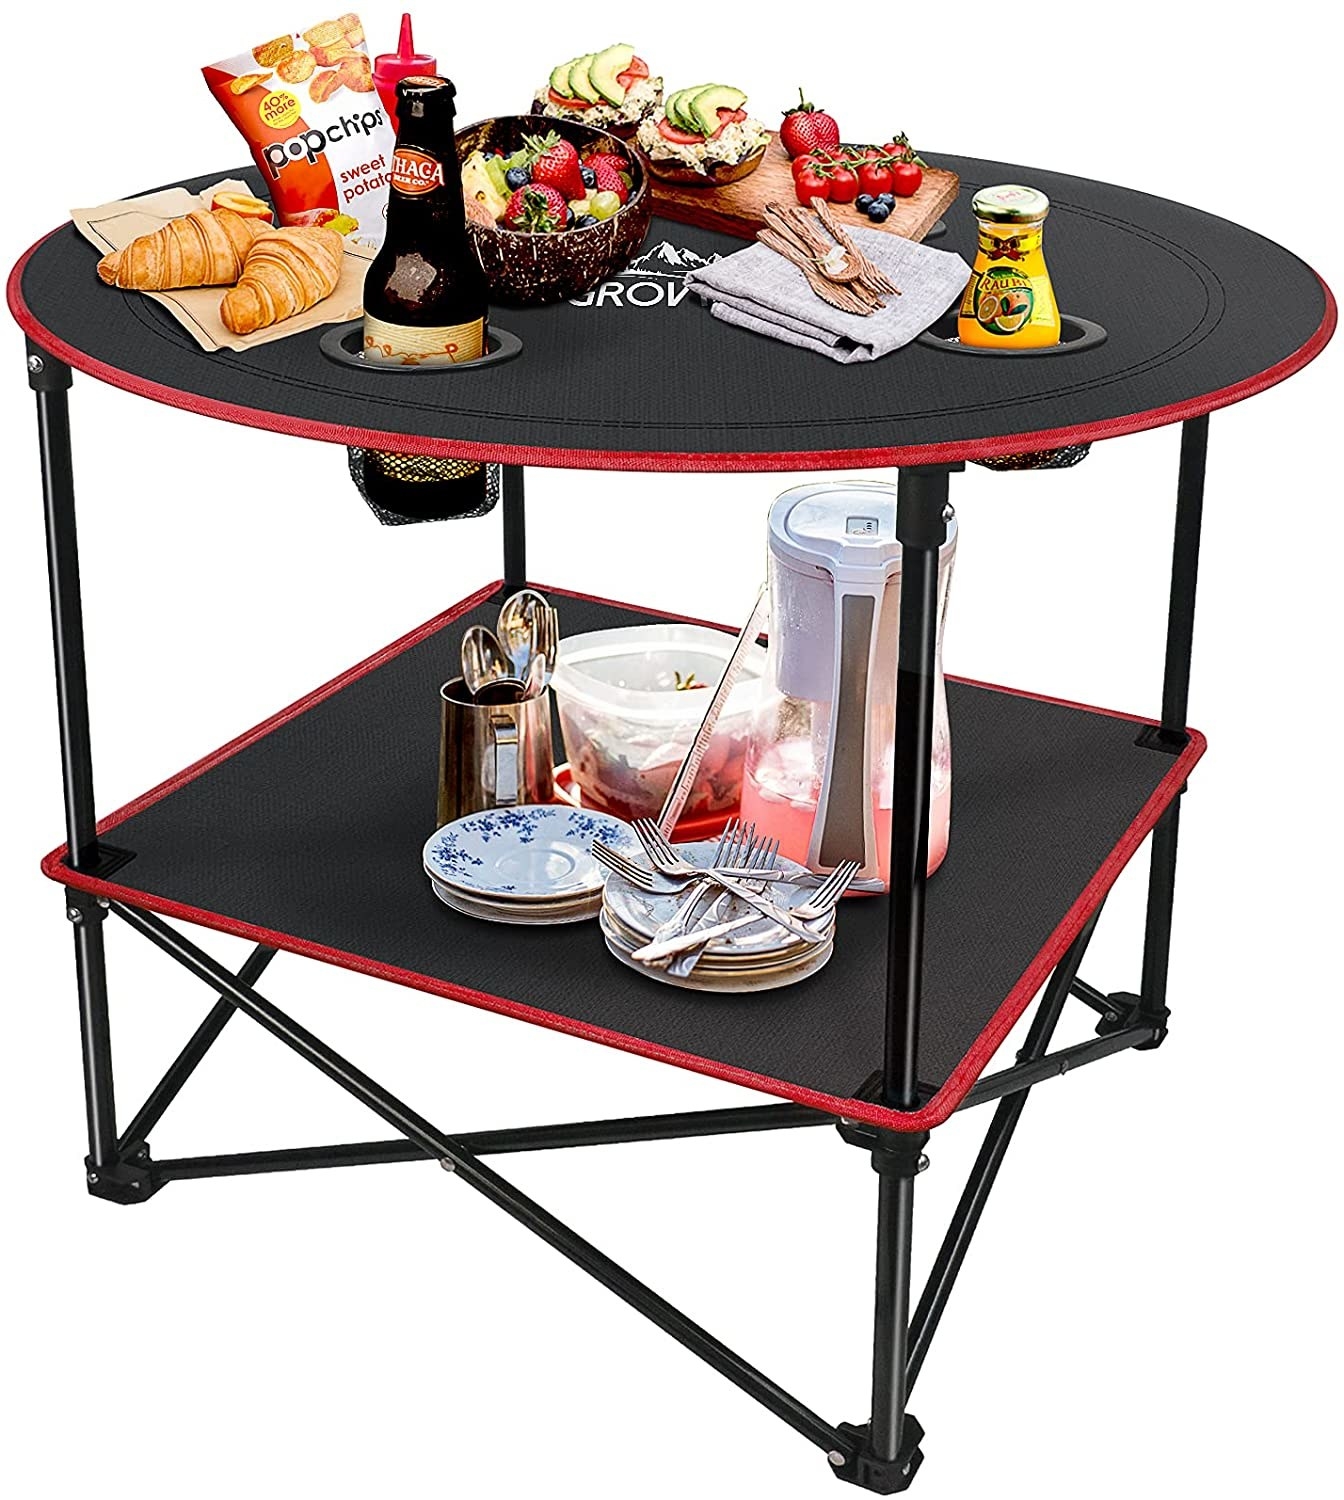 the portable camping table with food and drinks on both shelves